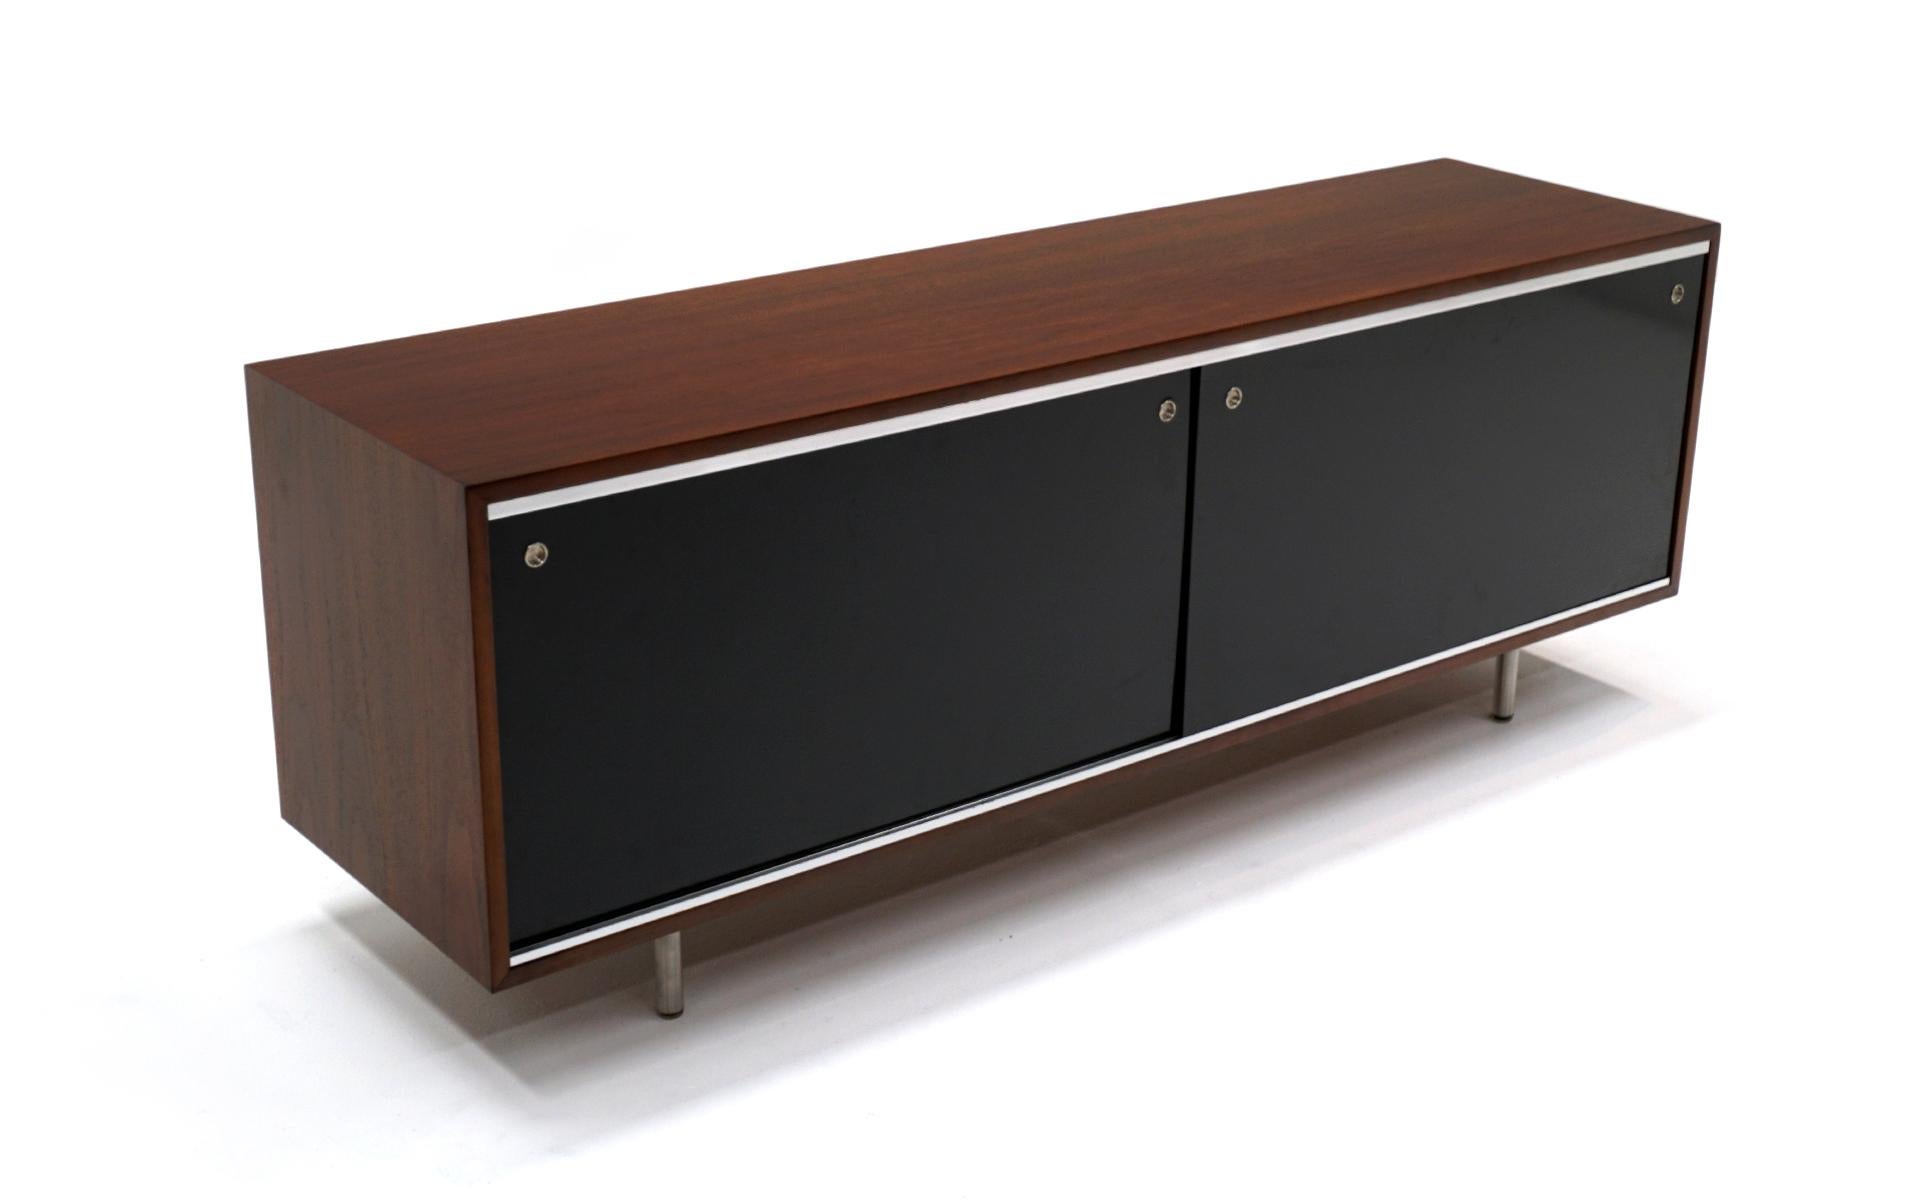 George Nelson for Herman Miller credenza / storage / media cabinet. This is an iconic midcentury design. Walnut case with sliding black panel doors revealing drawers and adjustable shelves. Expertly restored and refinished. Function perfectly. In